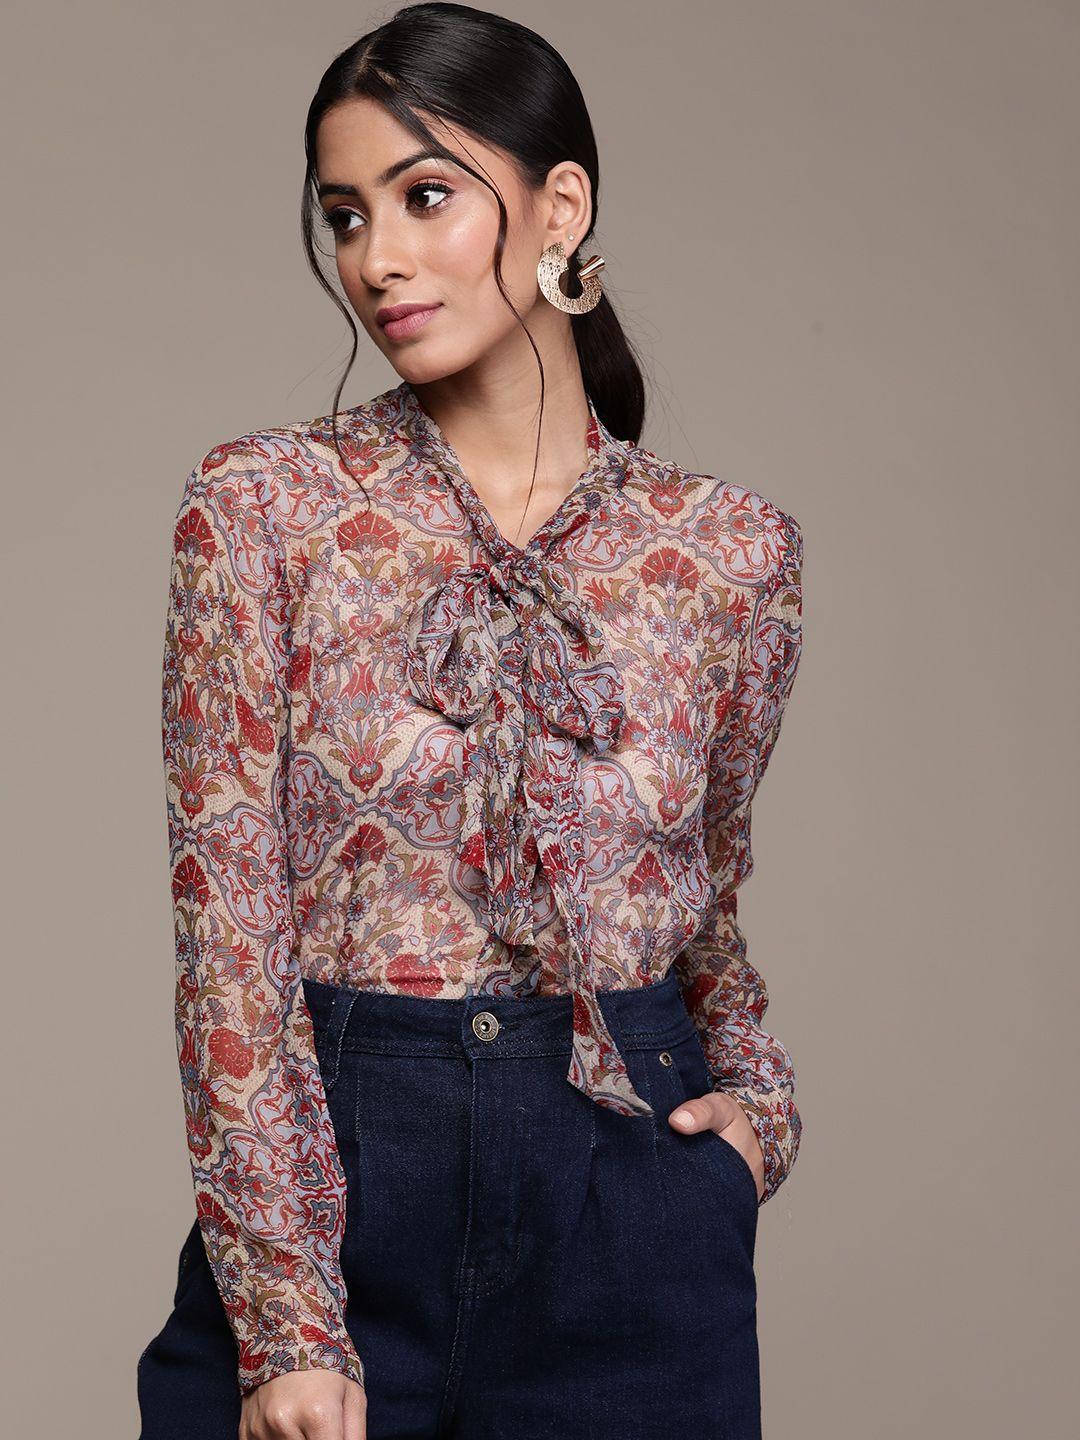 aarke-ritu-kumar-green-&-blue-ethnic-print-tie-up-neck-shirt-style-top-with-camisole